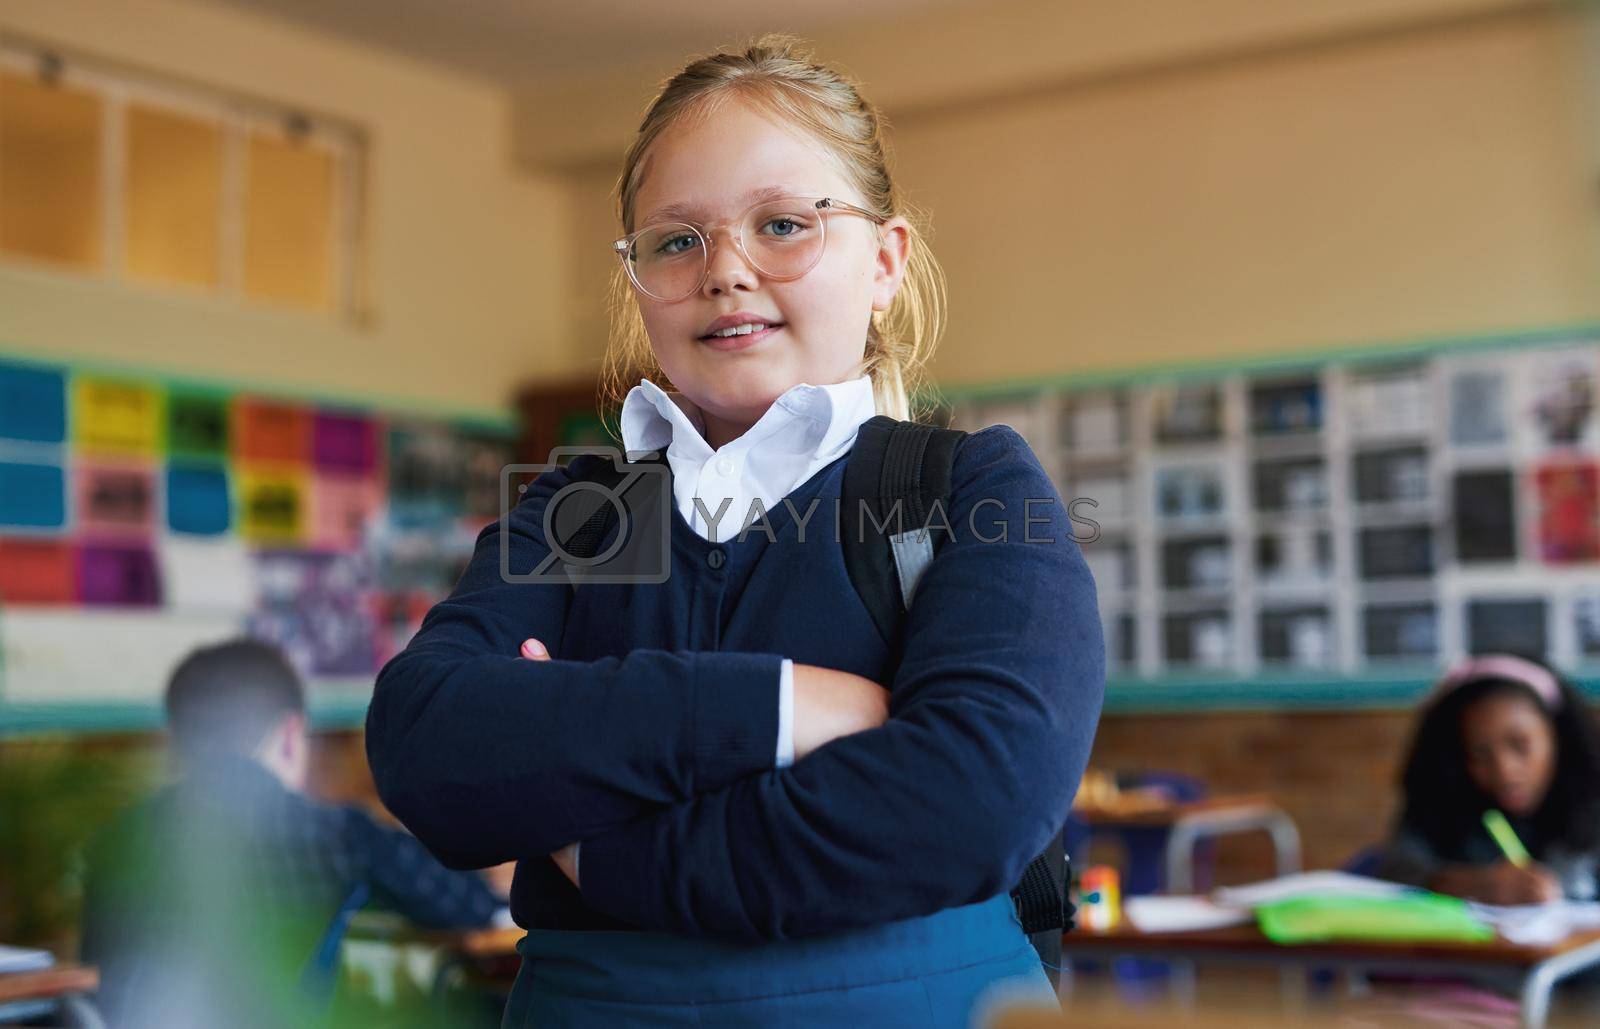 Shot of a young girl standing in her classroom at school with her arms folded.